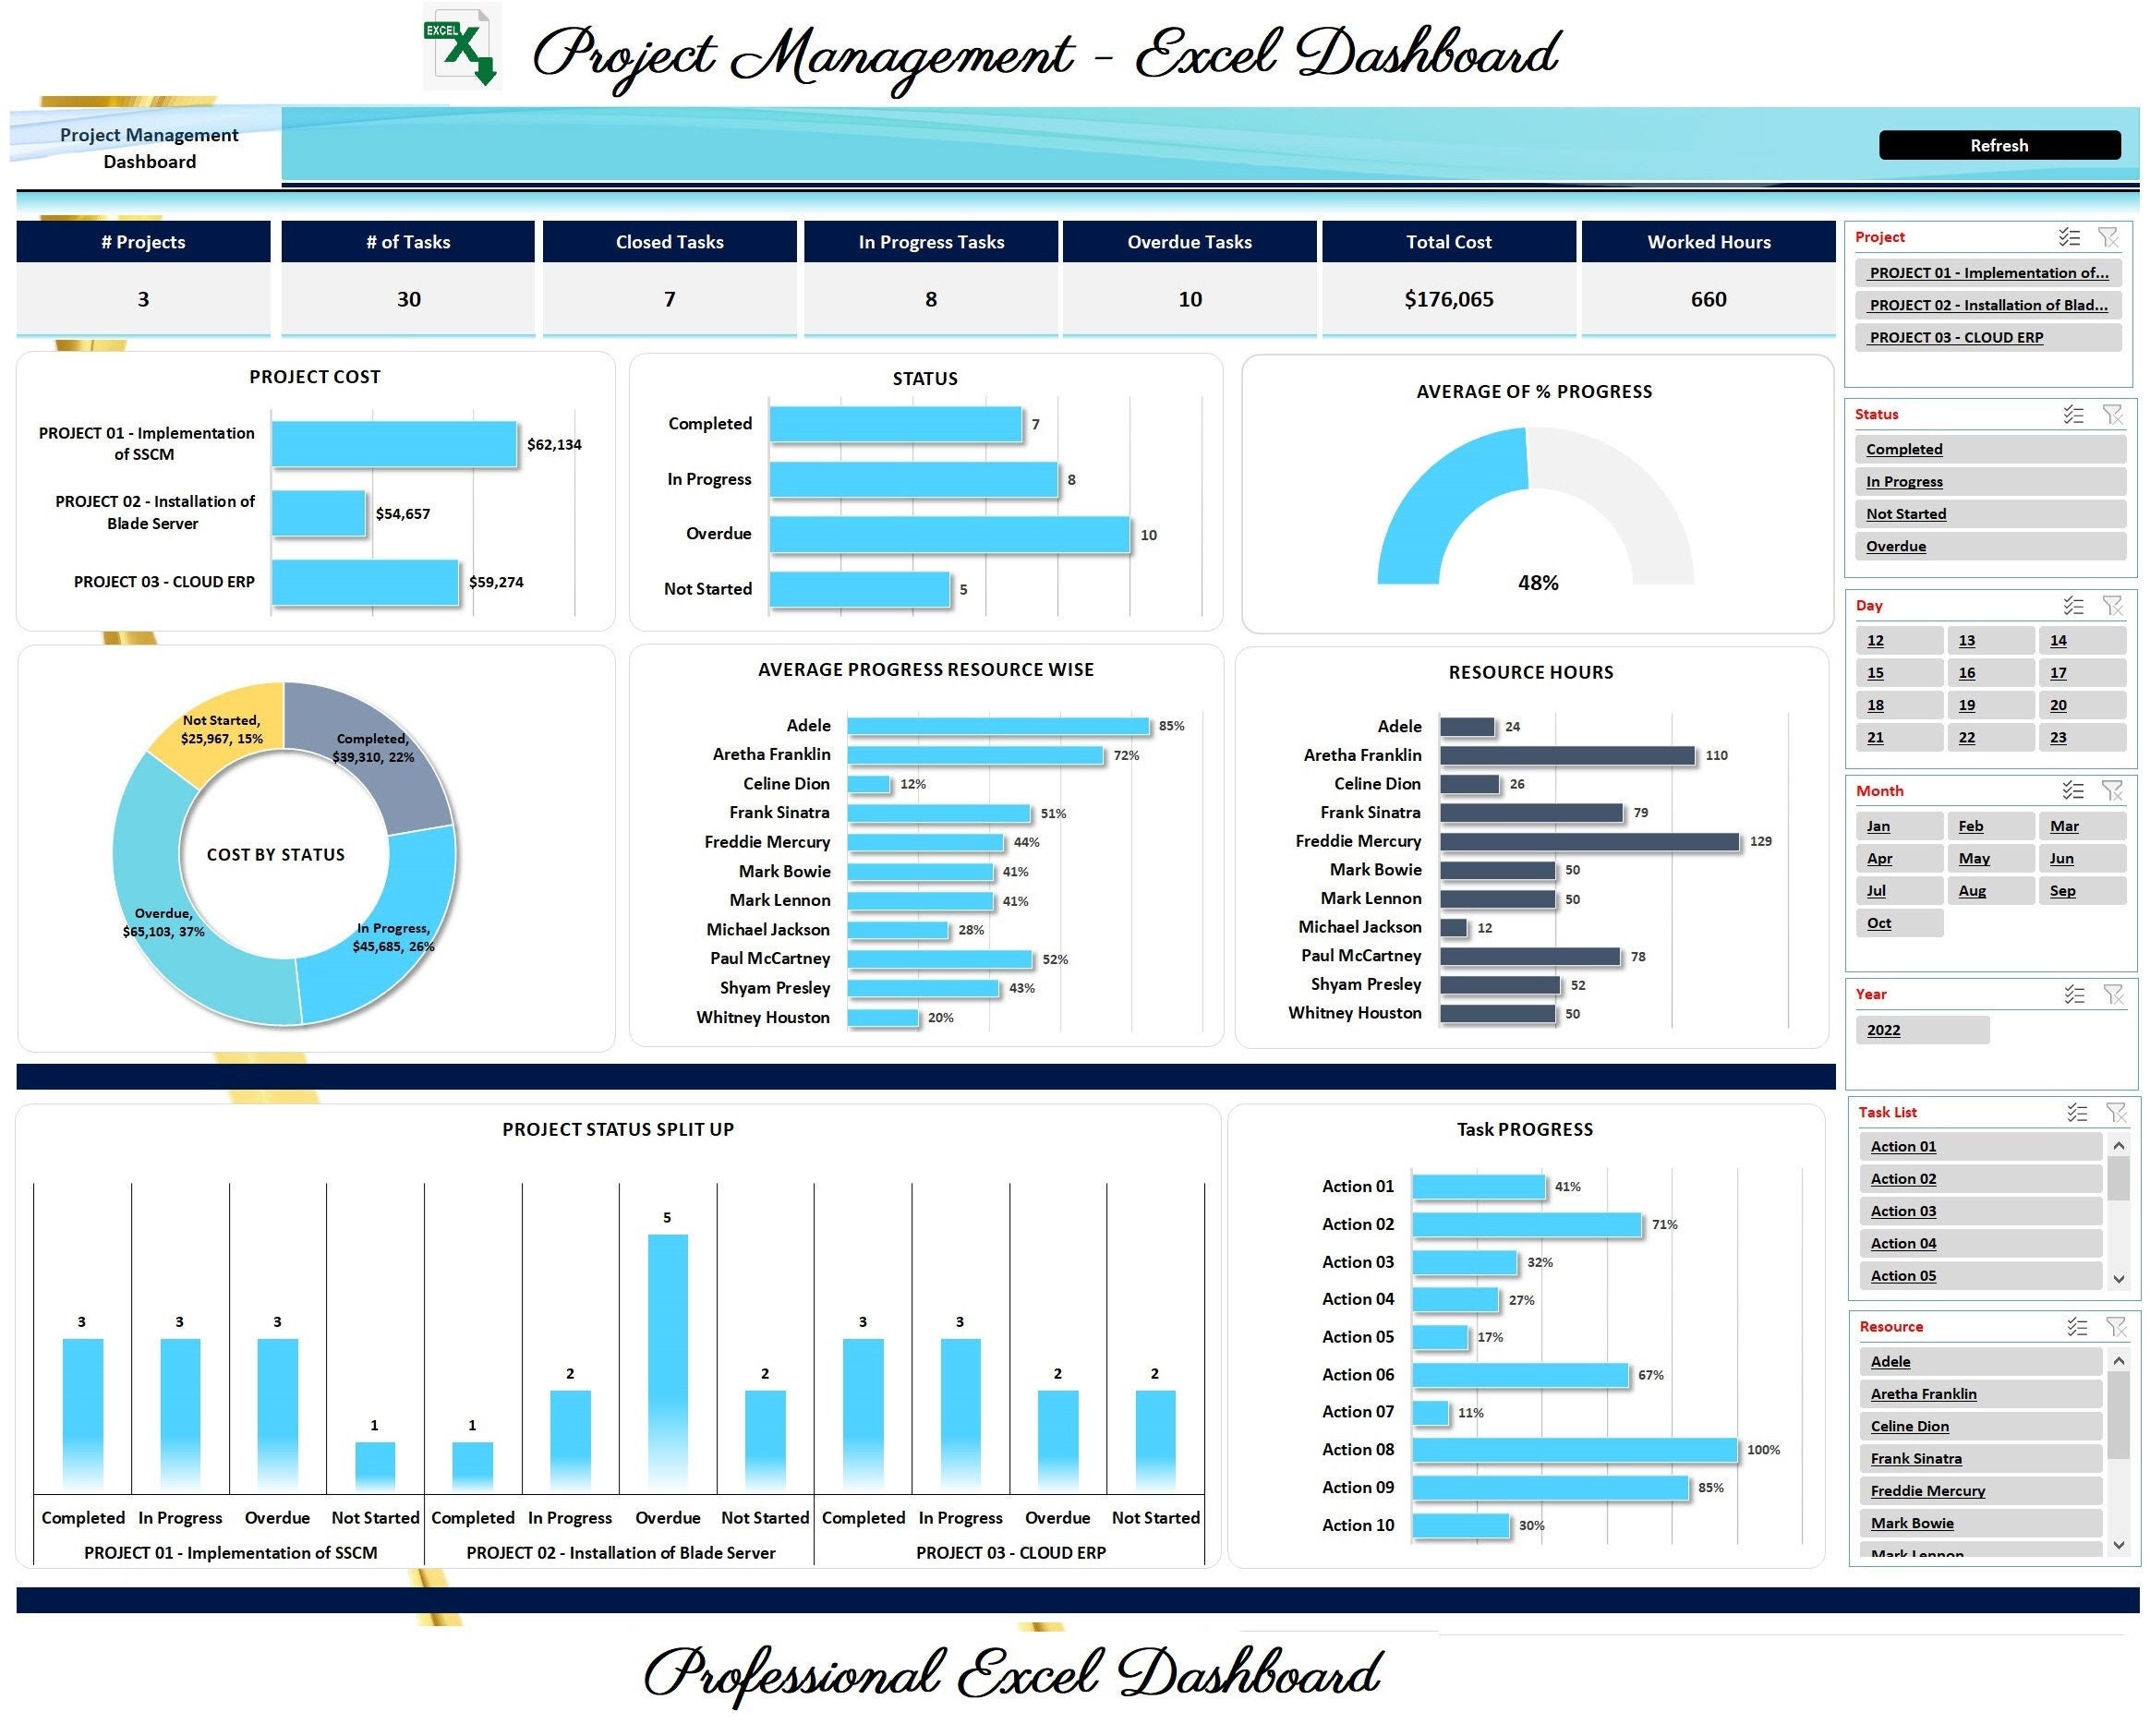 Project Management Dashboard Project Dashboard Multiple Project Status  Status Report 